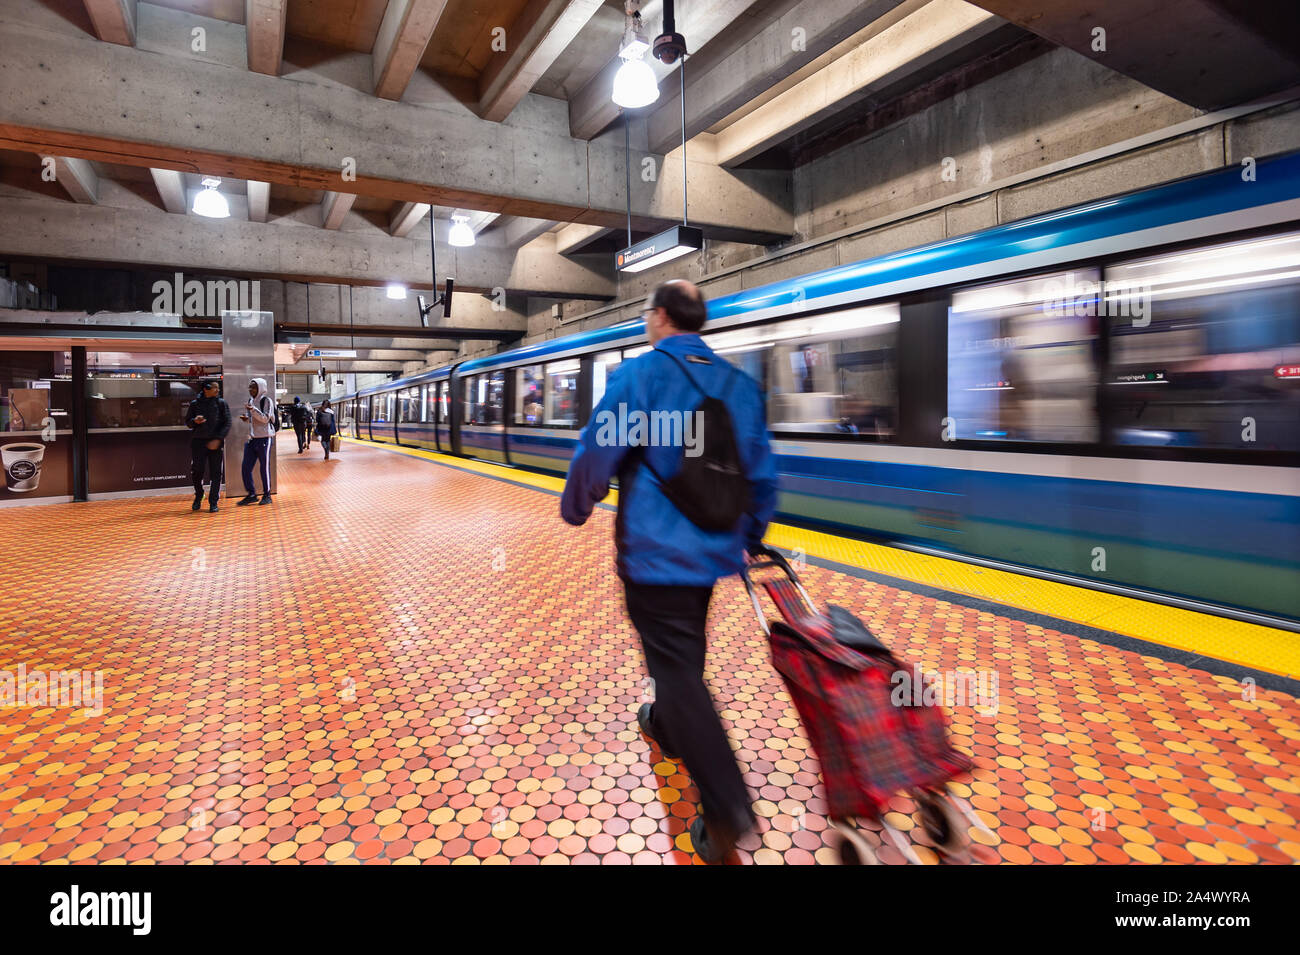 Montreal, CA - 15 October 2019: Subway train leaving Lionel Groux Station. Stock Photo